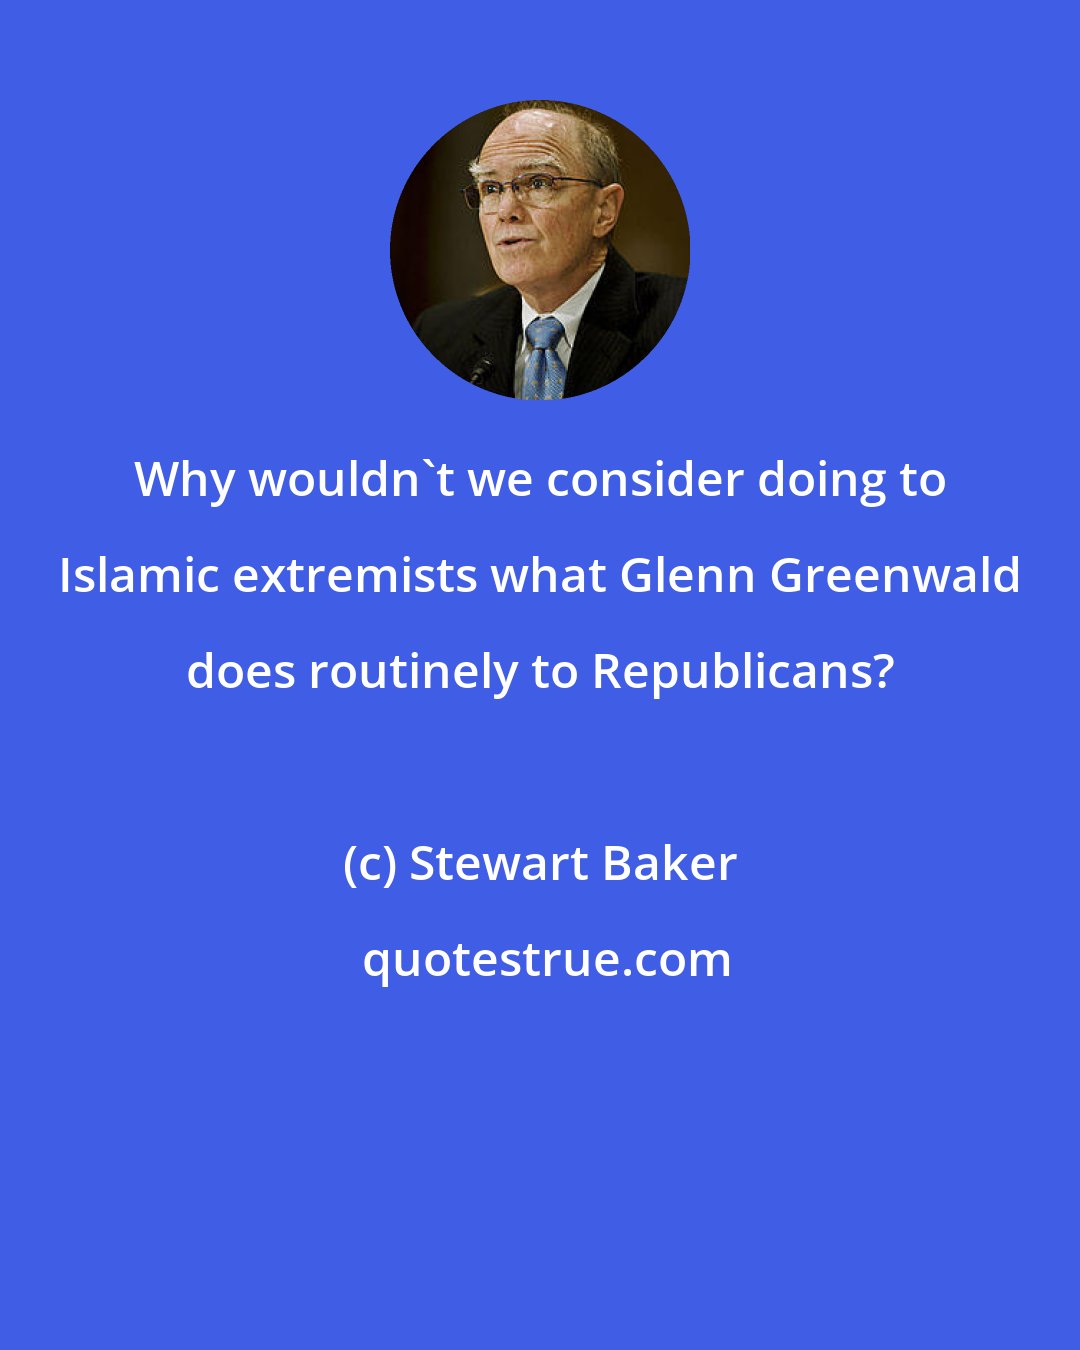 Stewart Baker: Why wouldn't we consider doing to Islamic extremists what Glenn Greenwald does routinely to Republicans?